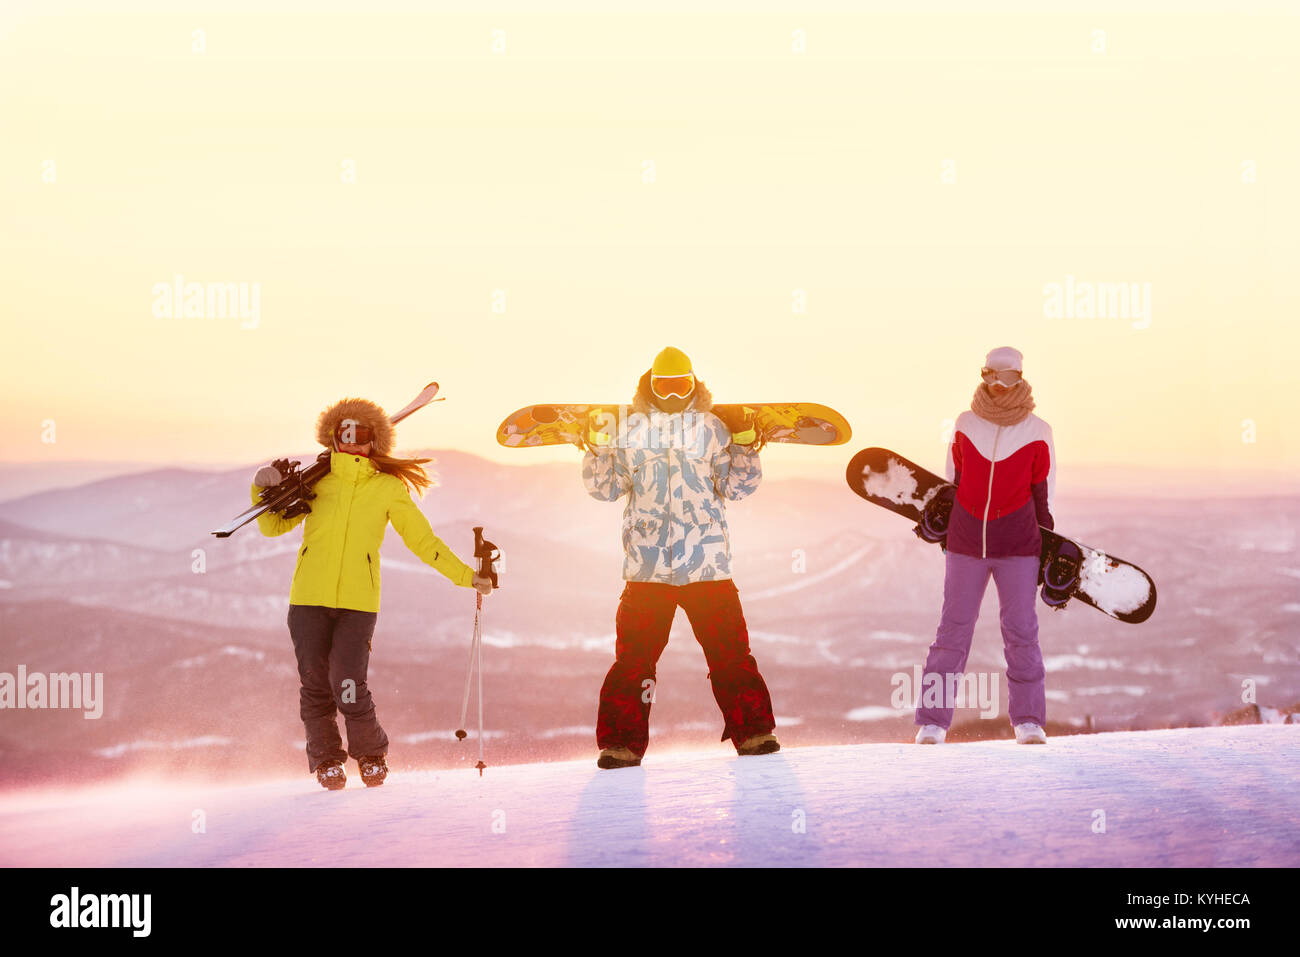 Ski or snowboard concept with three friends against sunset Stock Photo